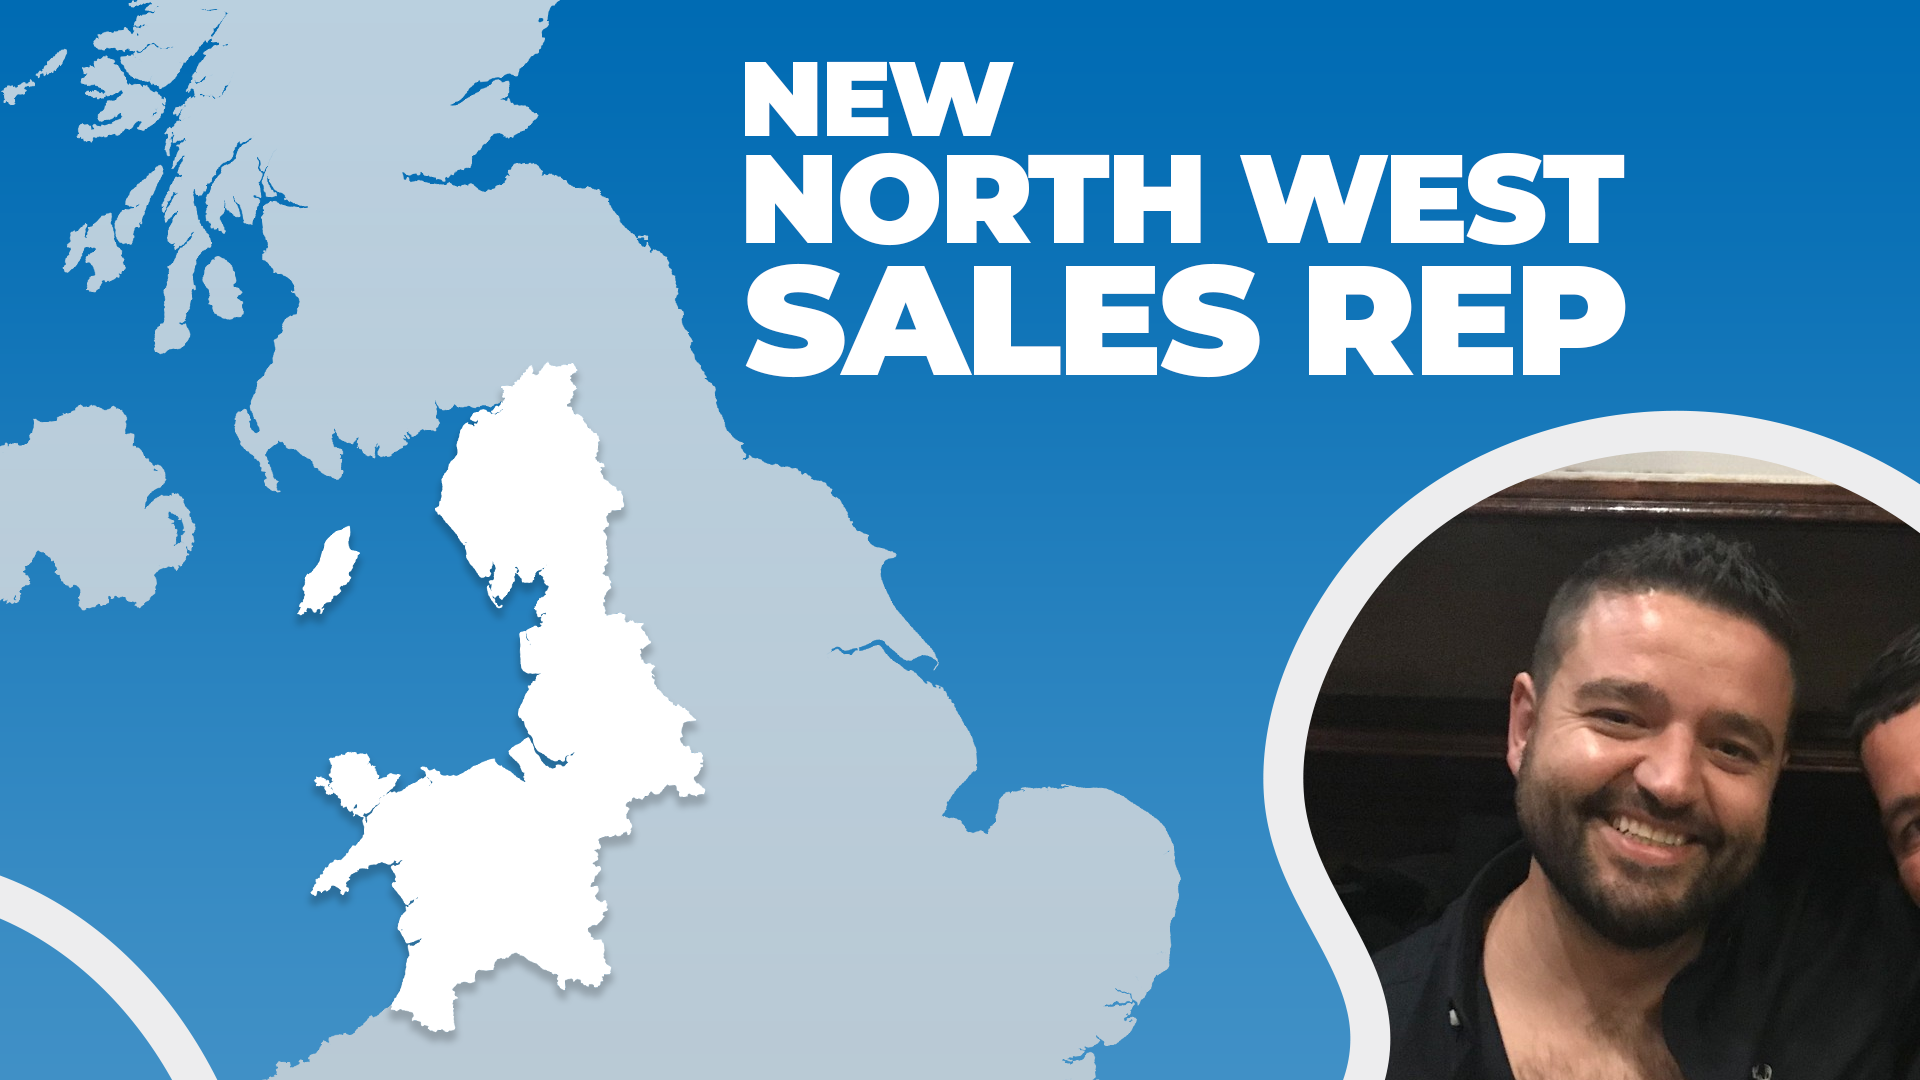 Meet Conor: Our New Sales Rep For The North West